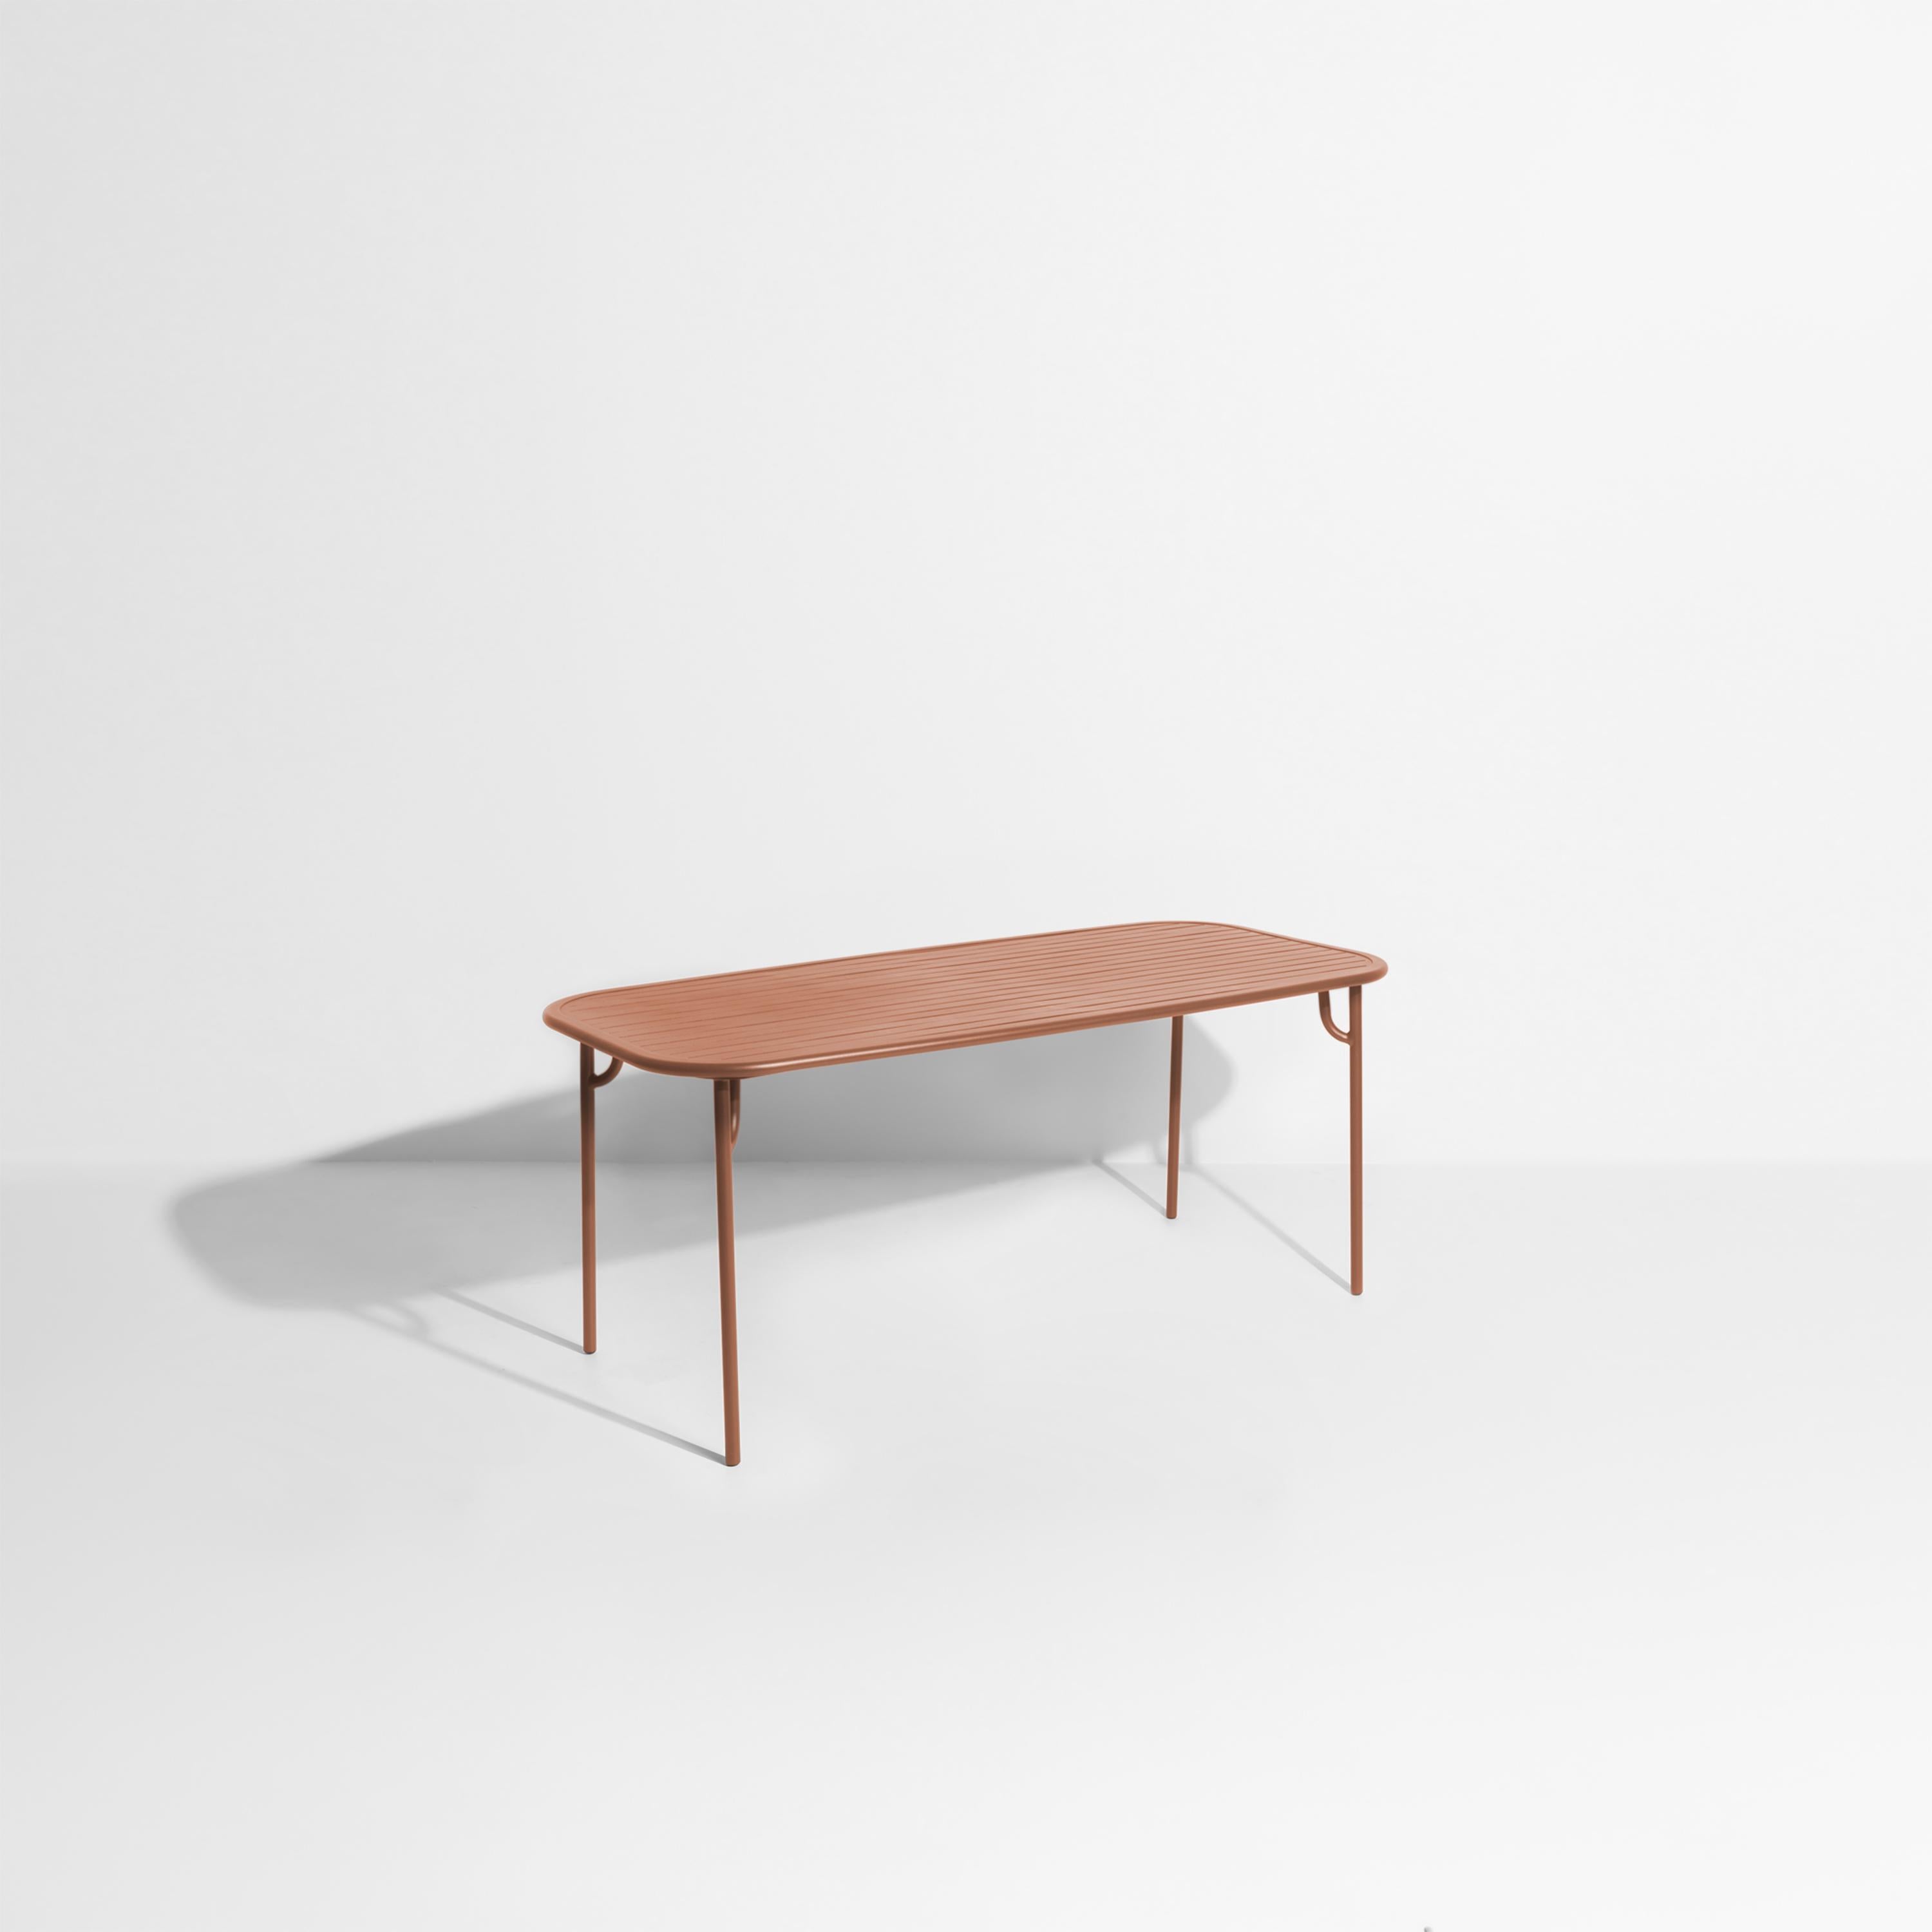 Petite Friture Week-End Medium Rectangular Dining Table in Terracotta Aluminium with Slats by Studio BrichetZiegler, 2017

The week-end collection is a full range of outdoor furniture, in aluminium grained epoxy paint, matt finish, that includes